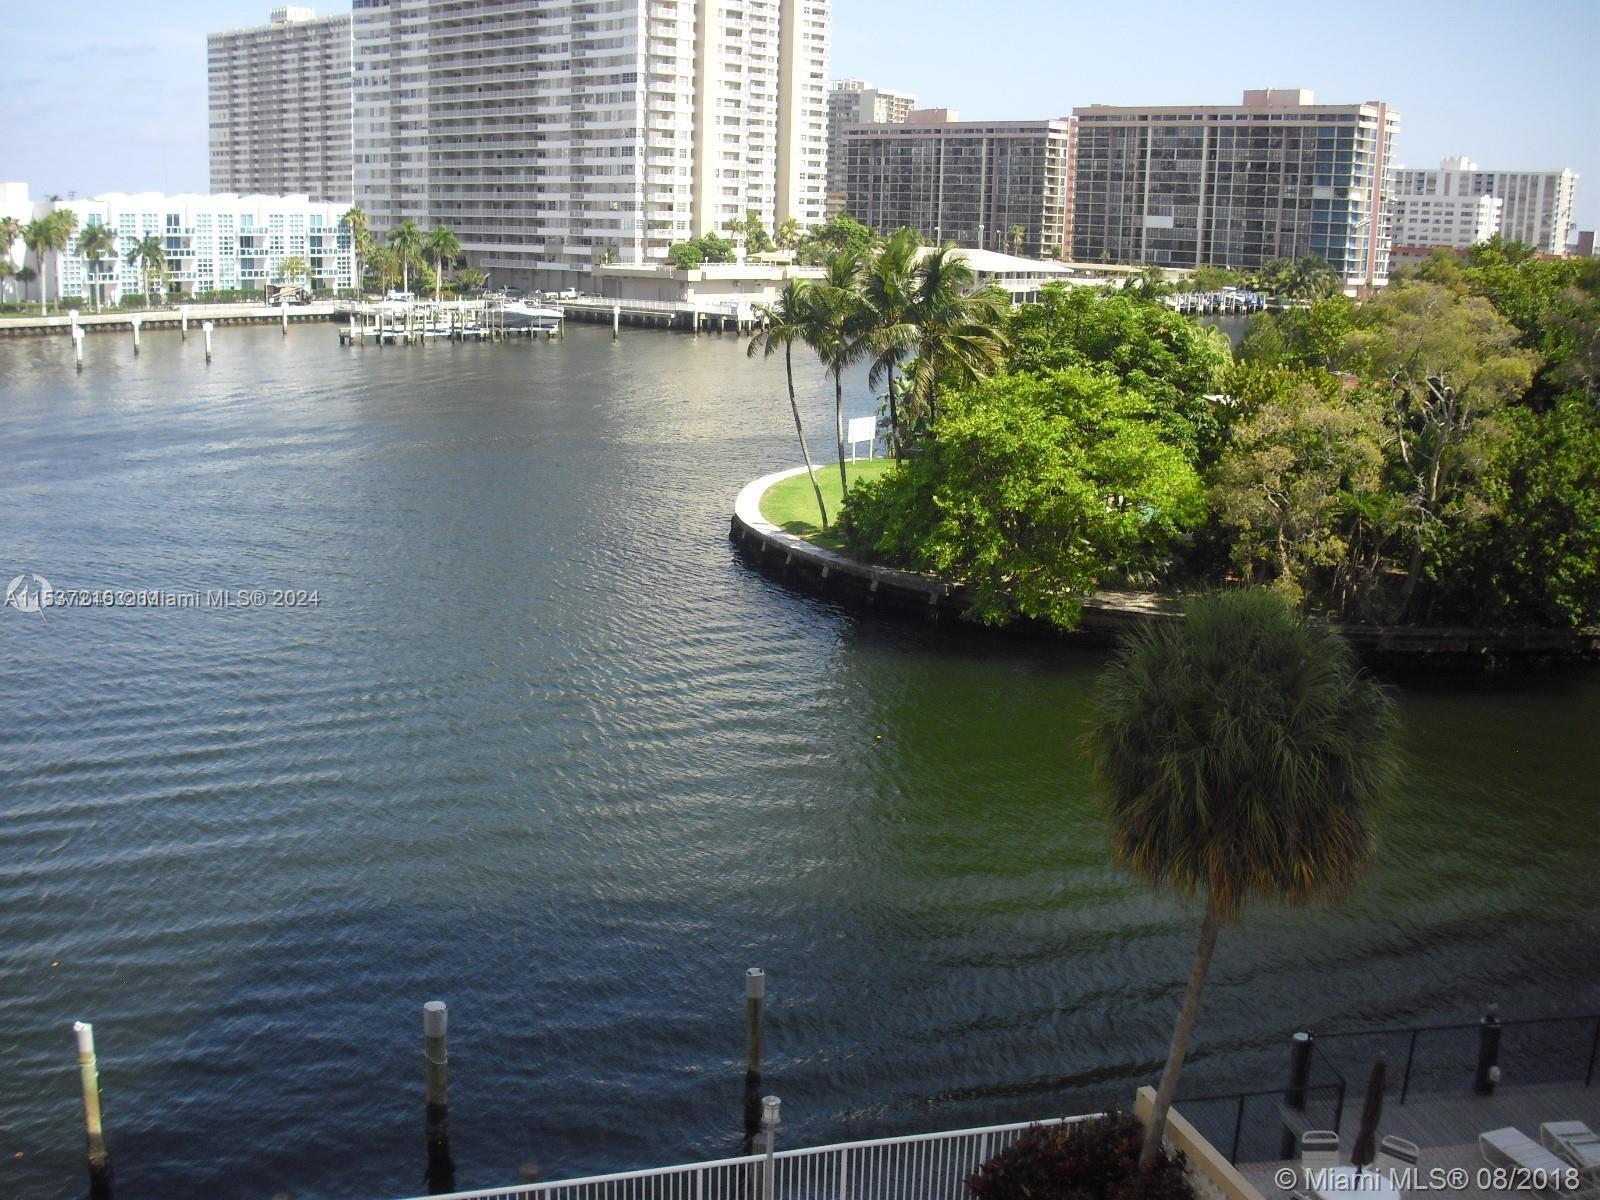 Experience the ultimate in luxurious living at Dorsey Arms Condo in Hallandale Beach, FL 33009. This